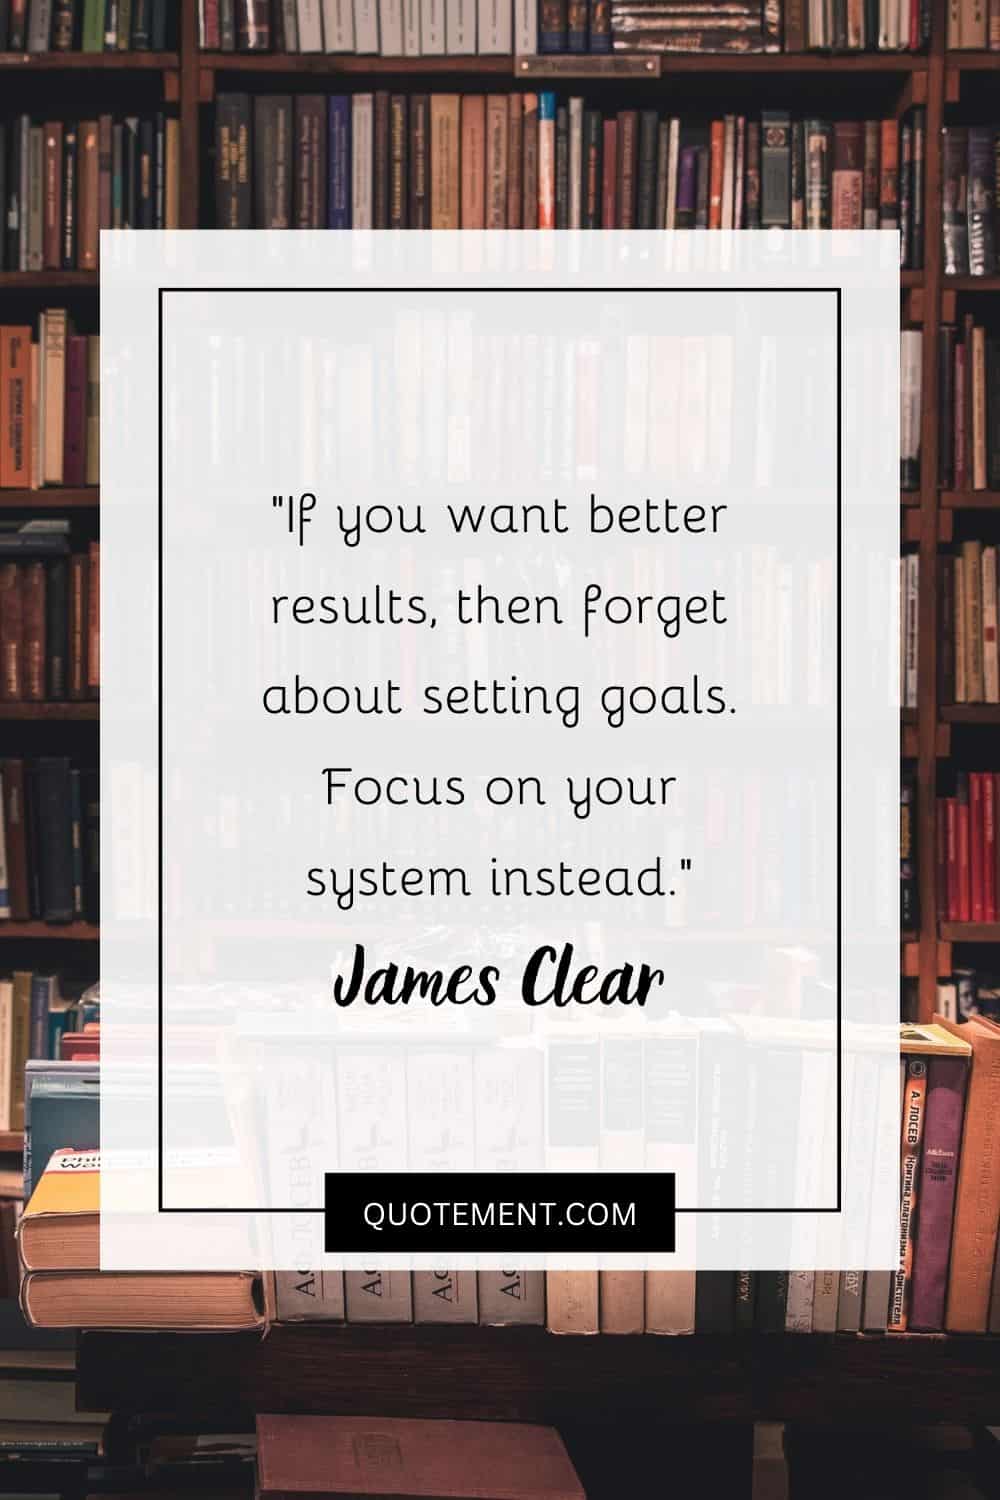 If you want better results, then forget about setting goals. Focus on your system instead.